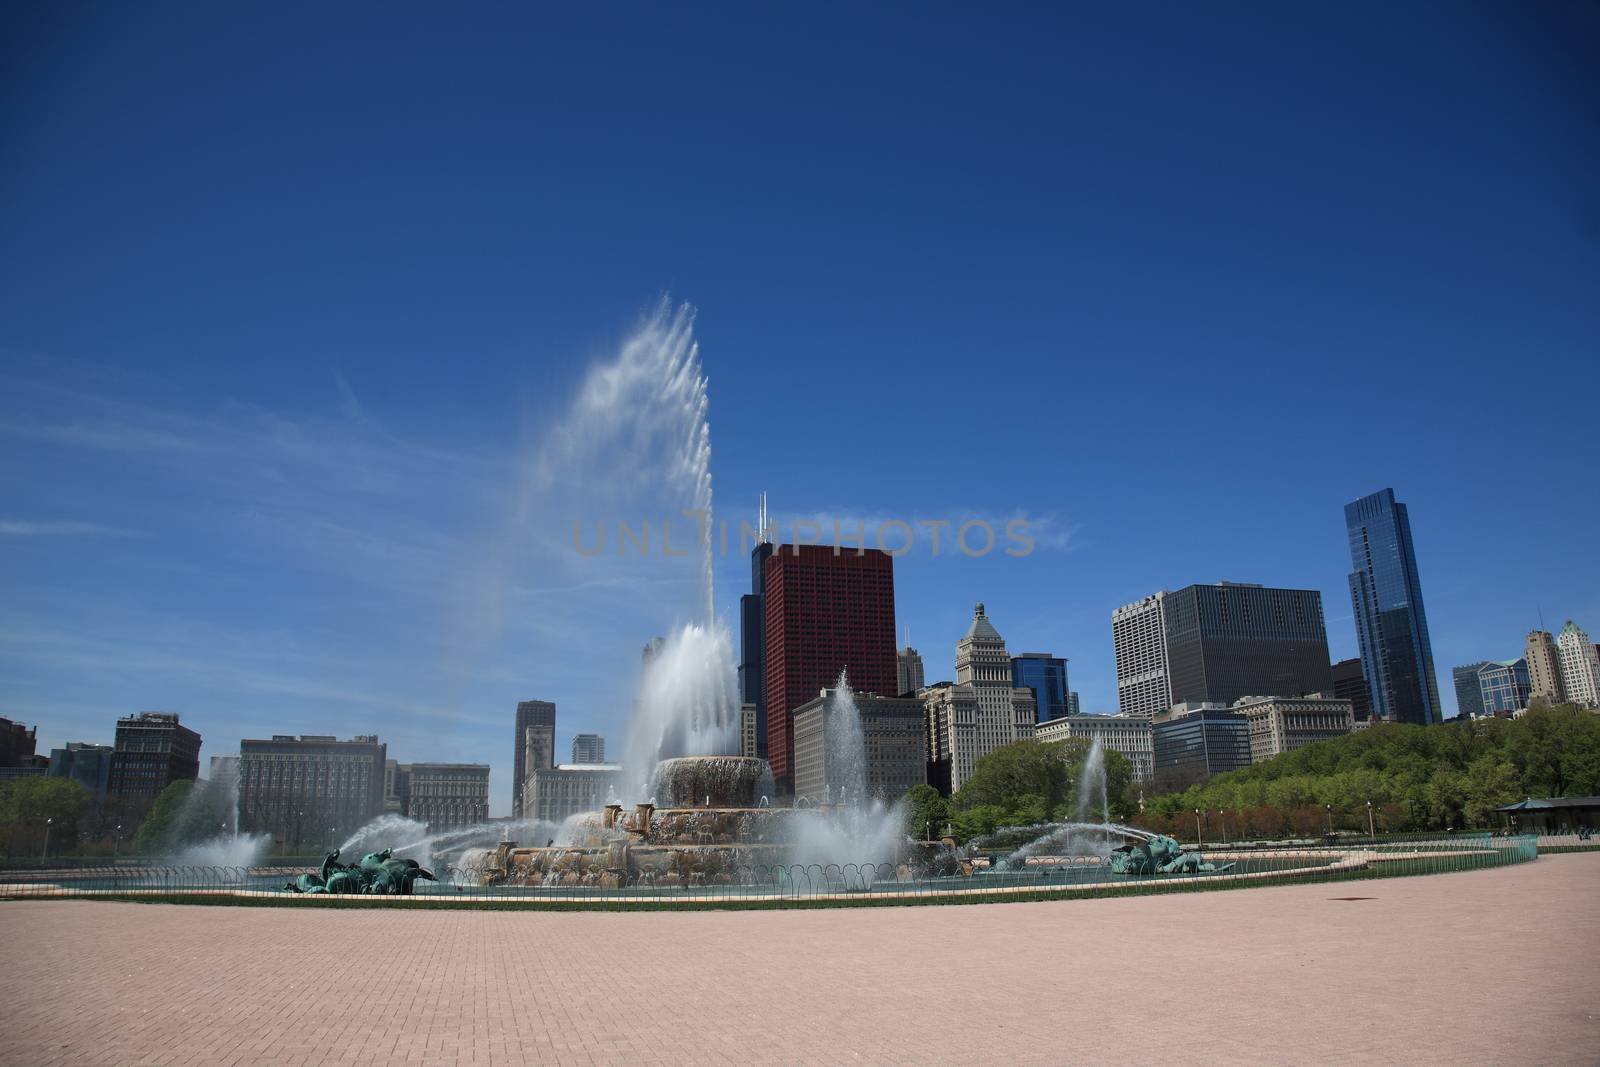 Chicago - Buckingham Fountain in Grant Park with skyscrapers in background.